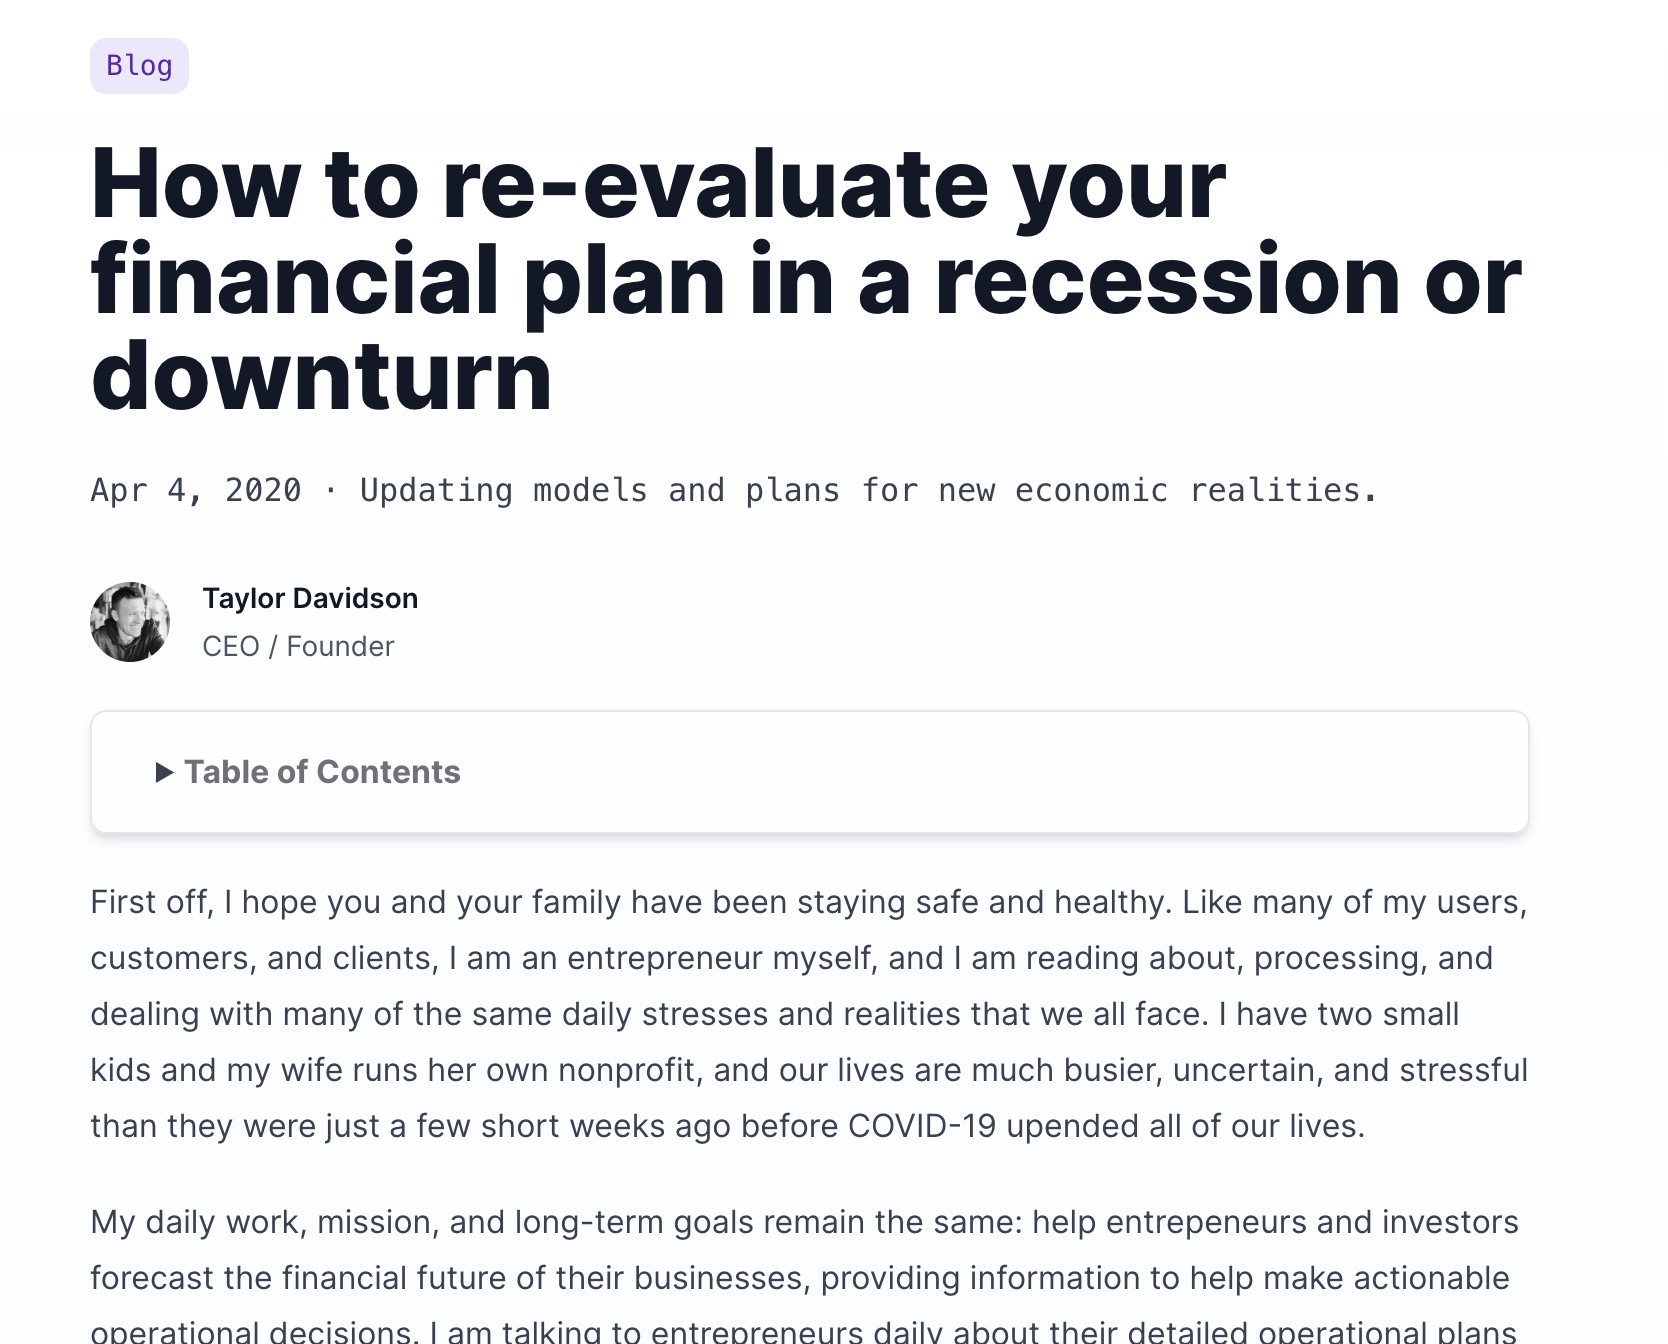 How to re-evaluate your financial plan in a recession or downturn